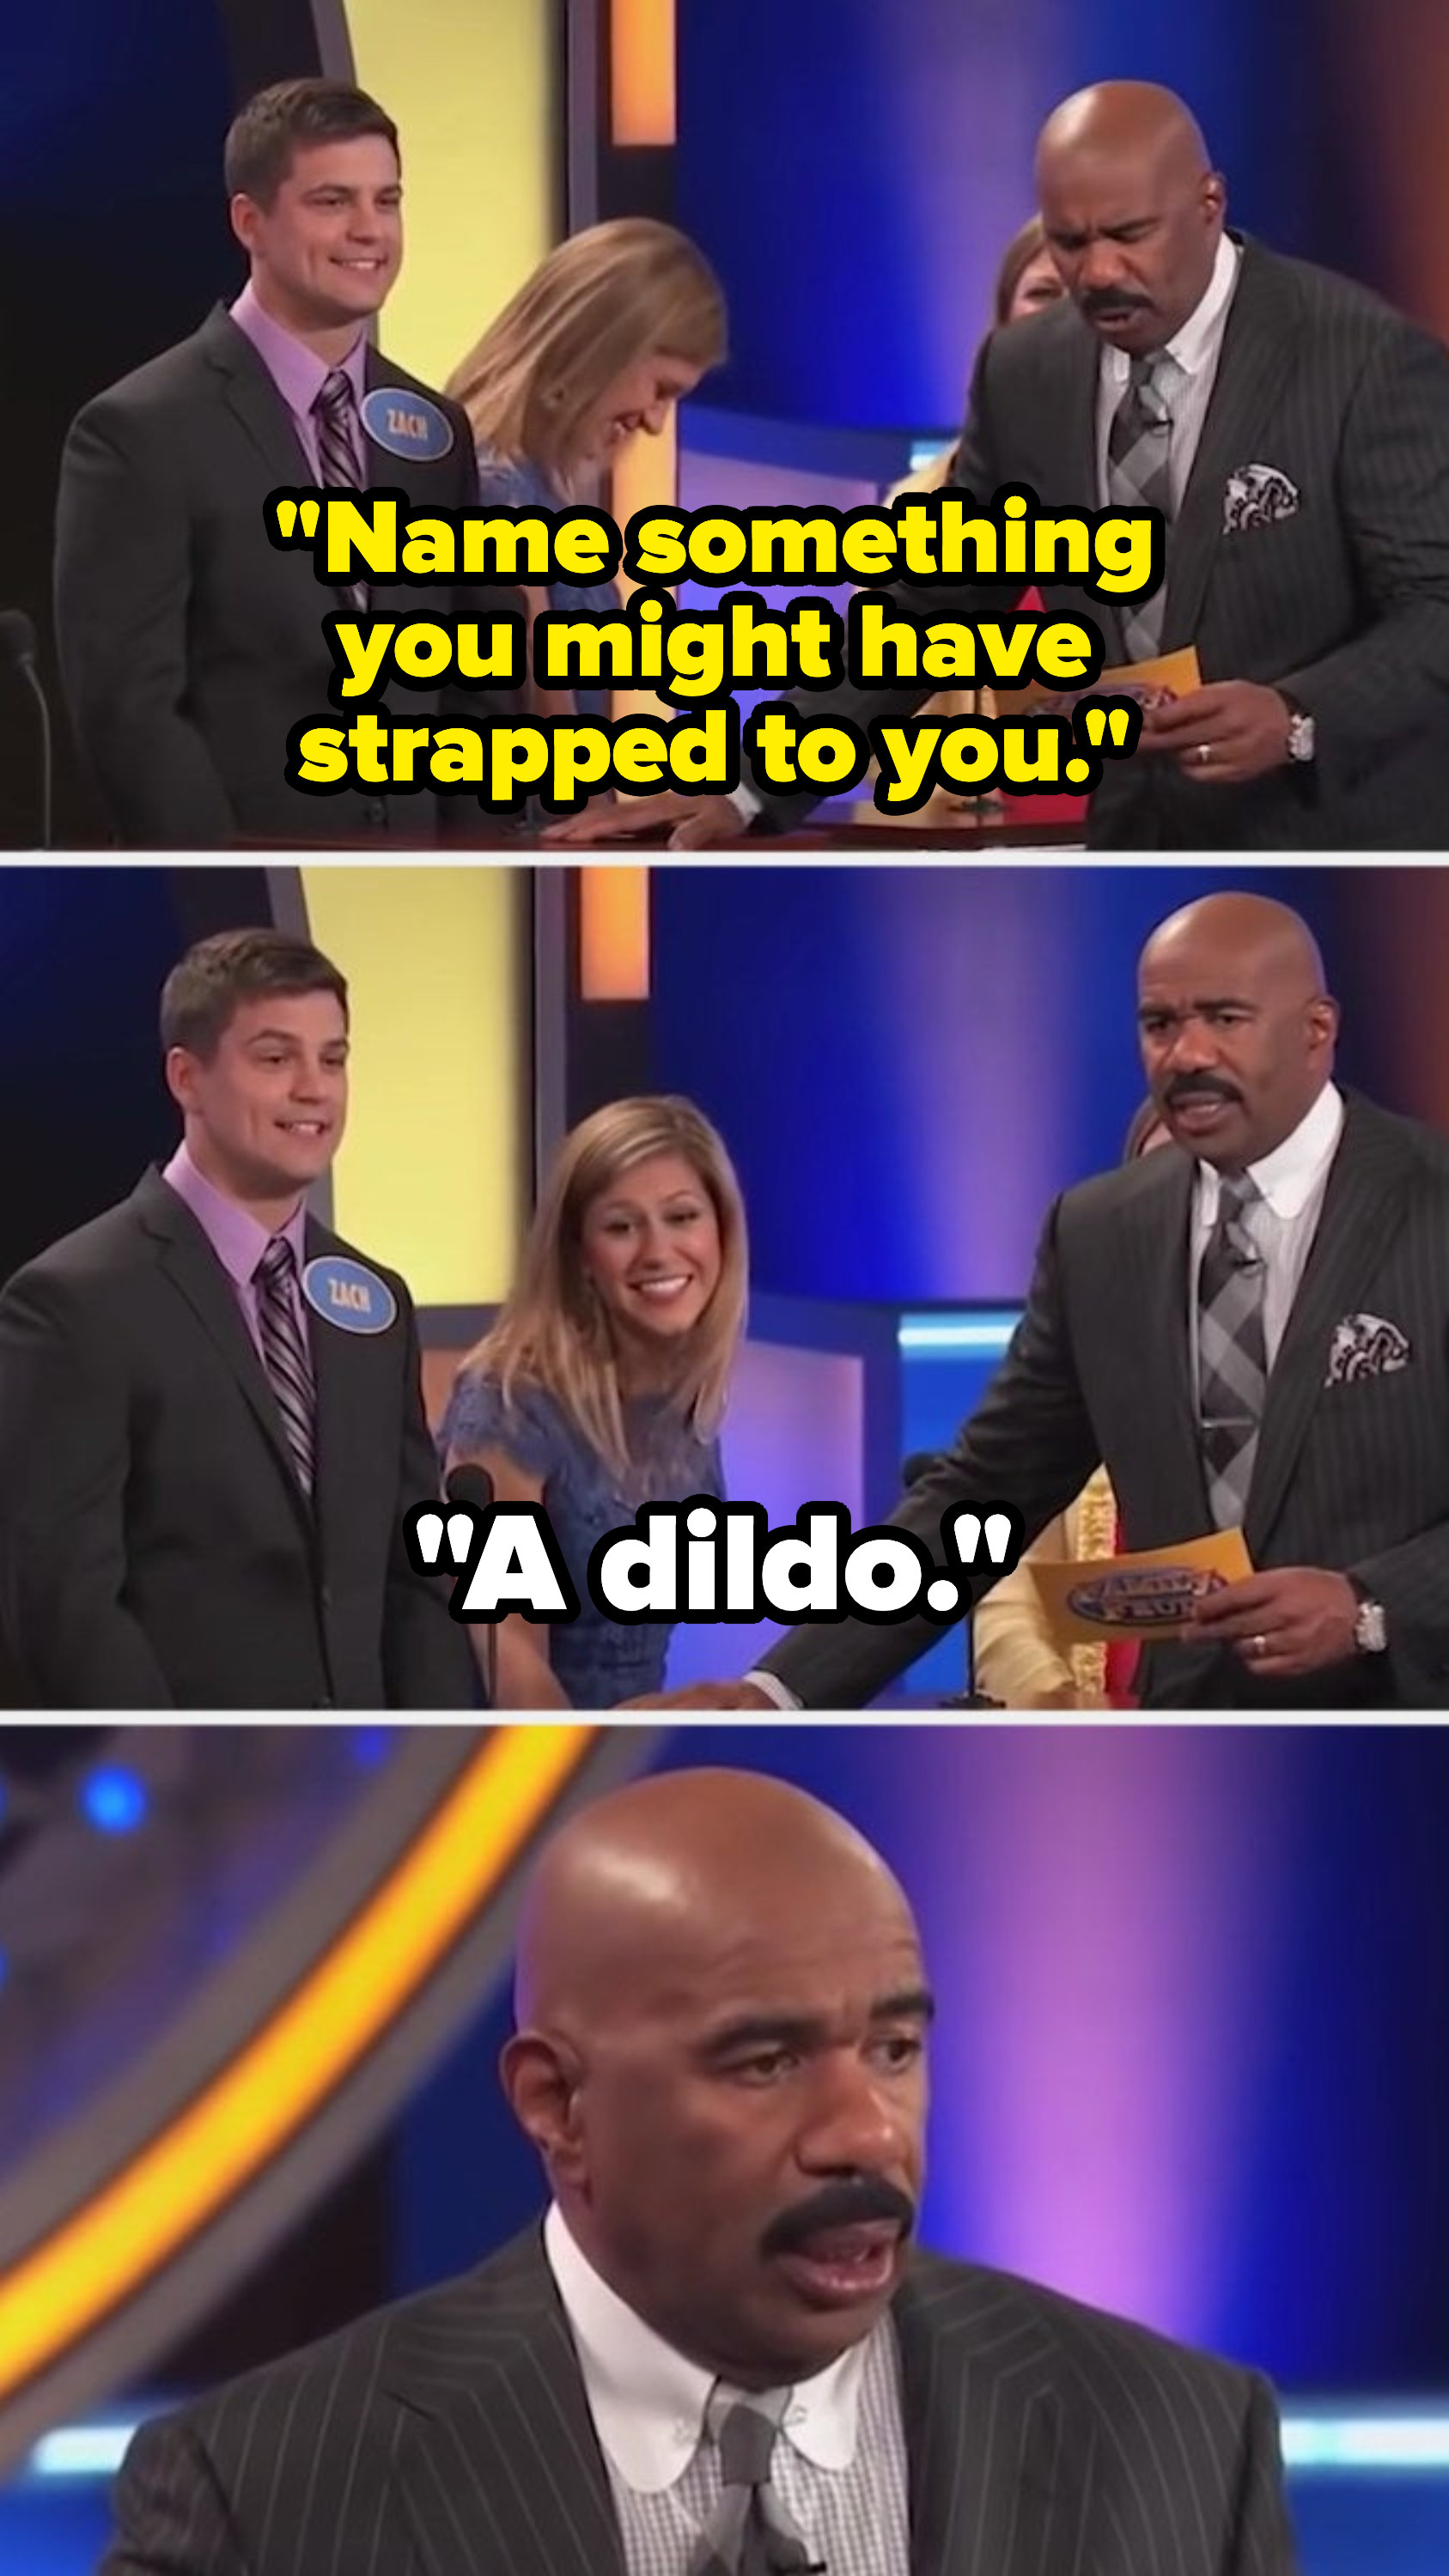 Steve says, &quot;Name something you might have strapped to you,&quot; and a contestant answers, &quot;A dildo,&quot; leaving Steve shocked